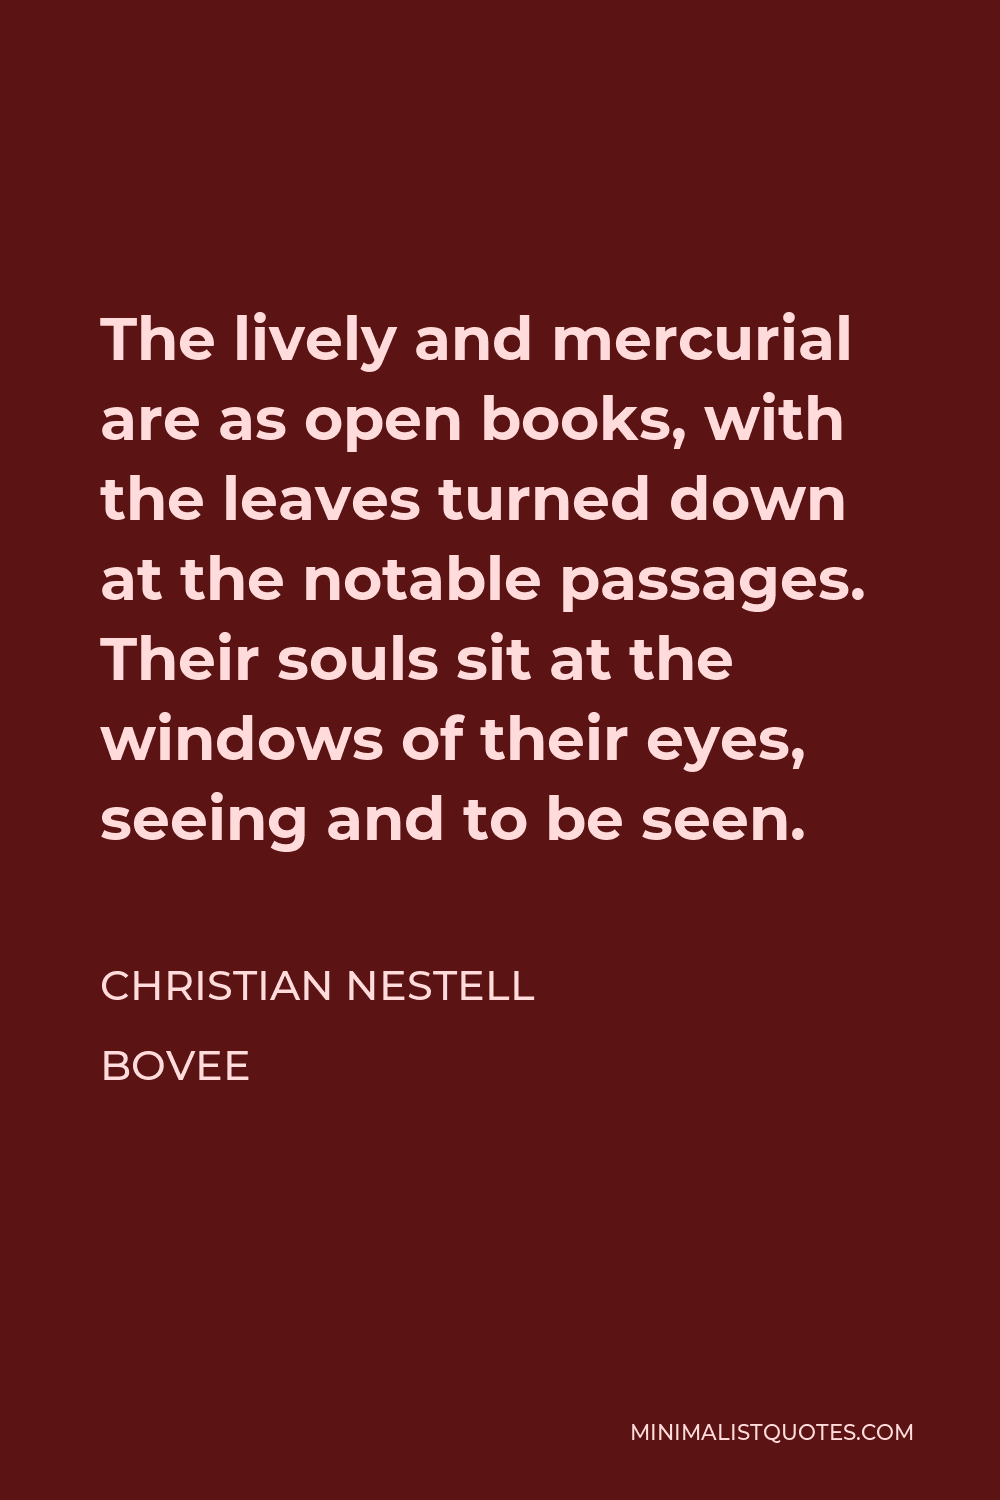 Christian Nestell Bovee Quote - The lively and mercurial are as open books, with the leaves turned down at the notable passages. Their souls sit at the windows of their eyes, seeing and to be seen.